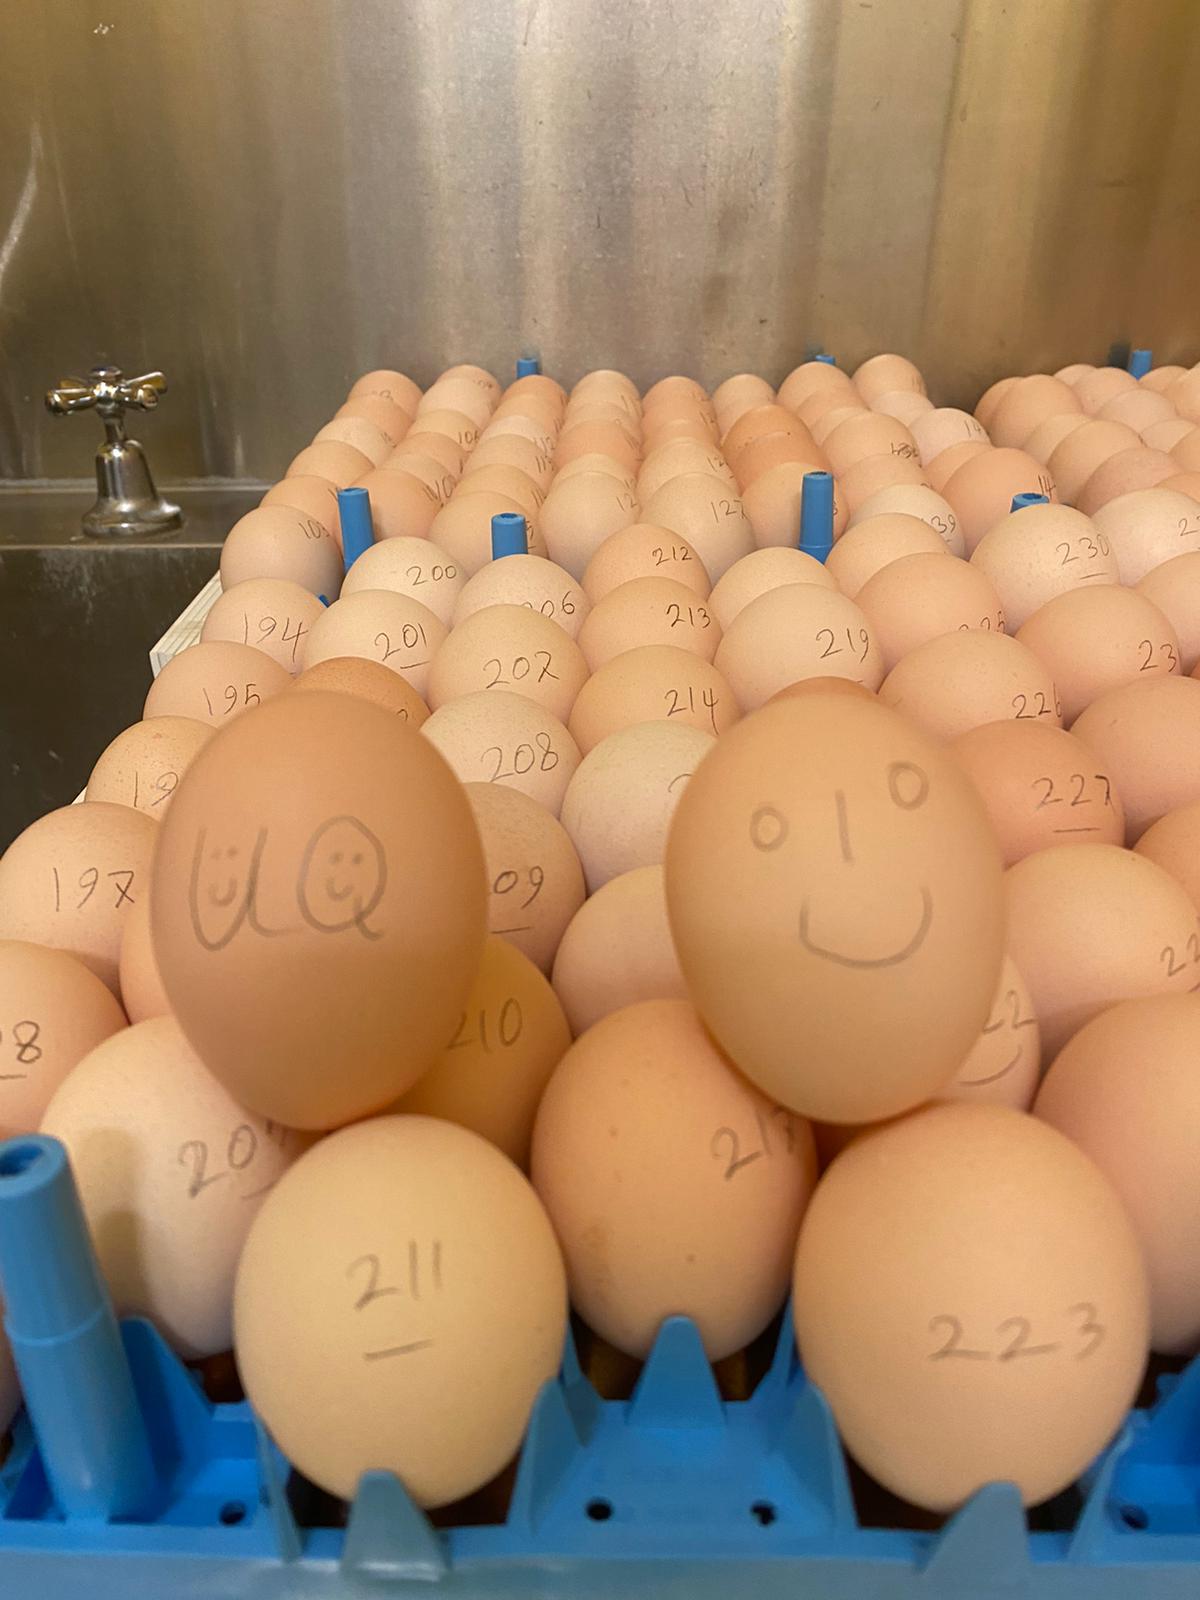 Eggs involved in the research